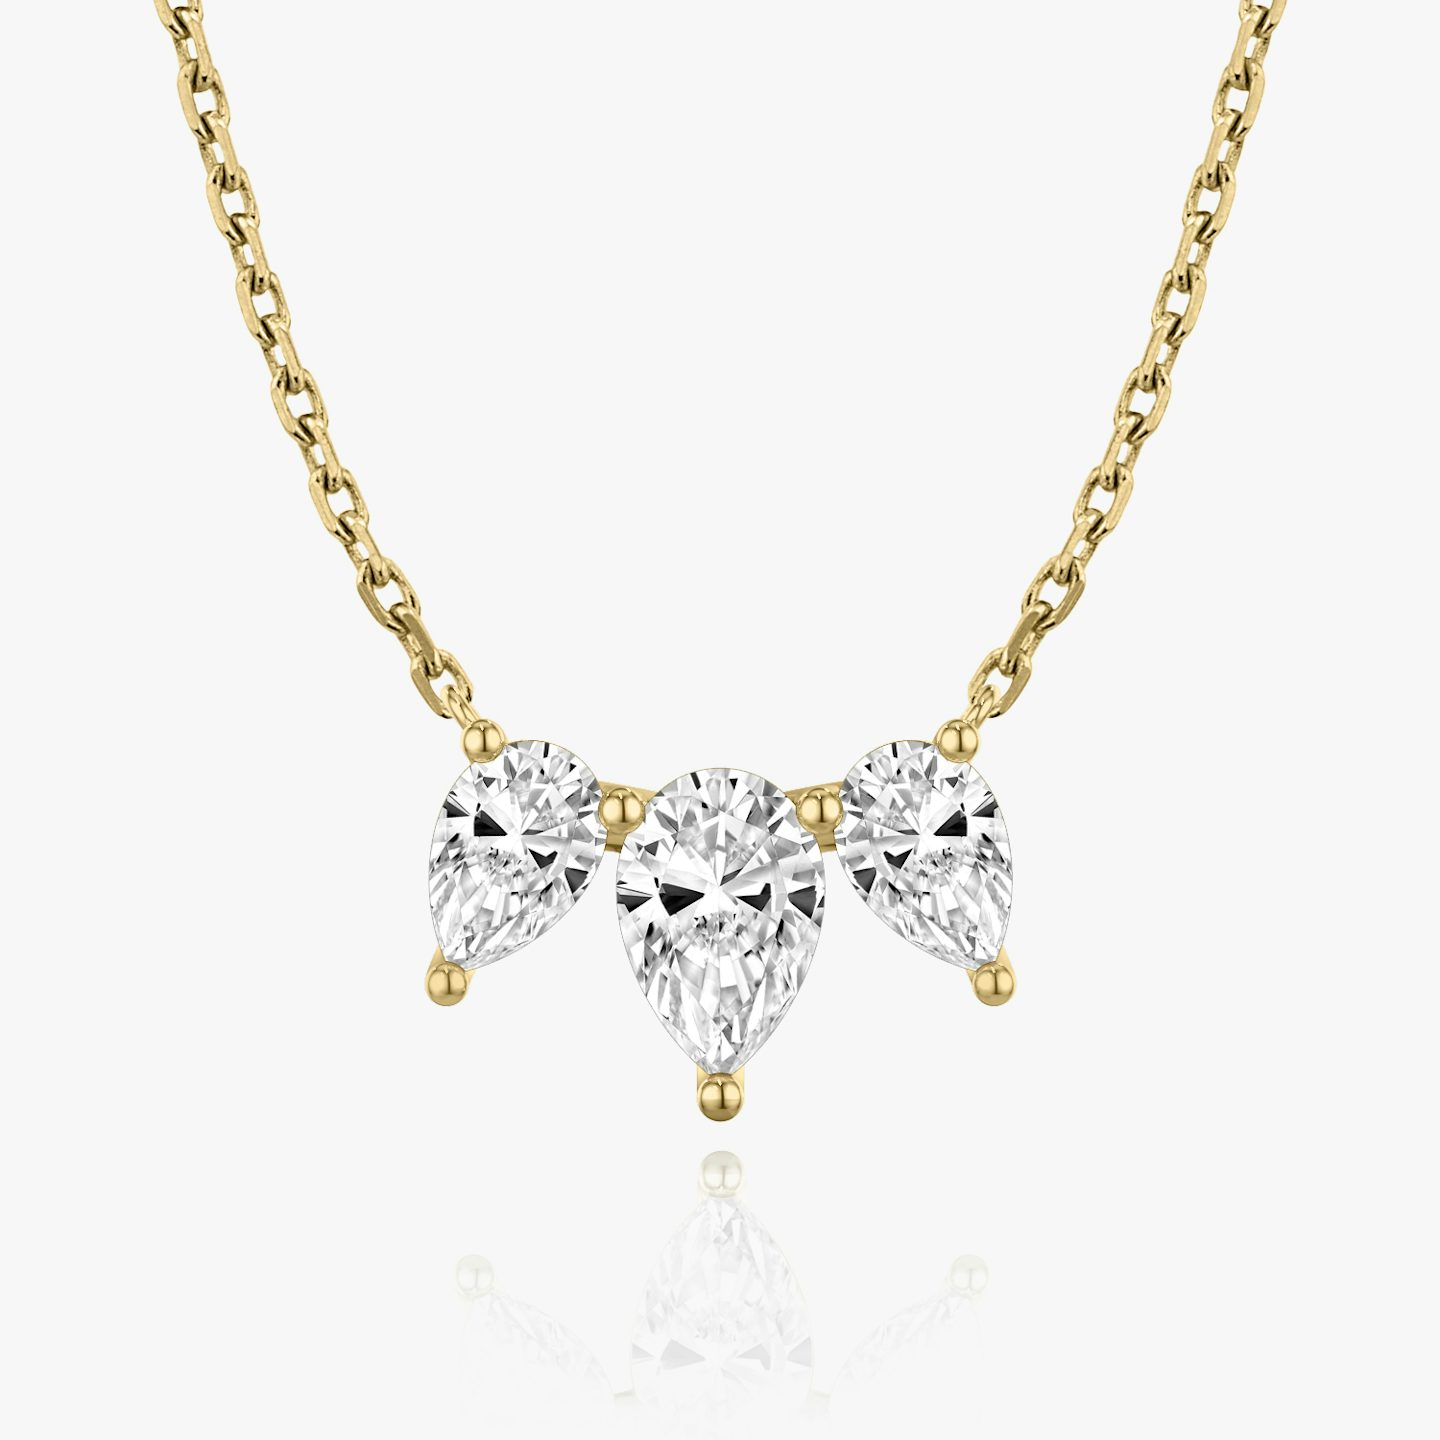 Arc Necklace | Pear | 14k | 18k Yellow Gold | Chain length: 16-18 | Diamond size: Large | Diamond count: 3